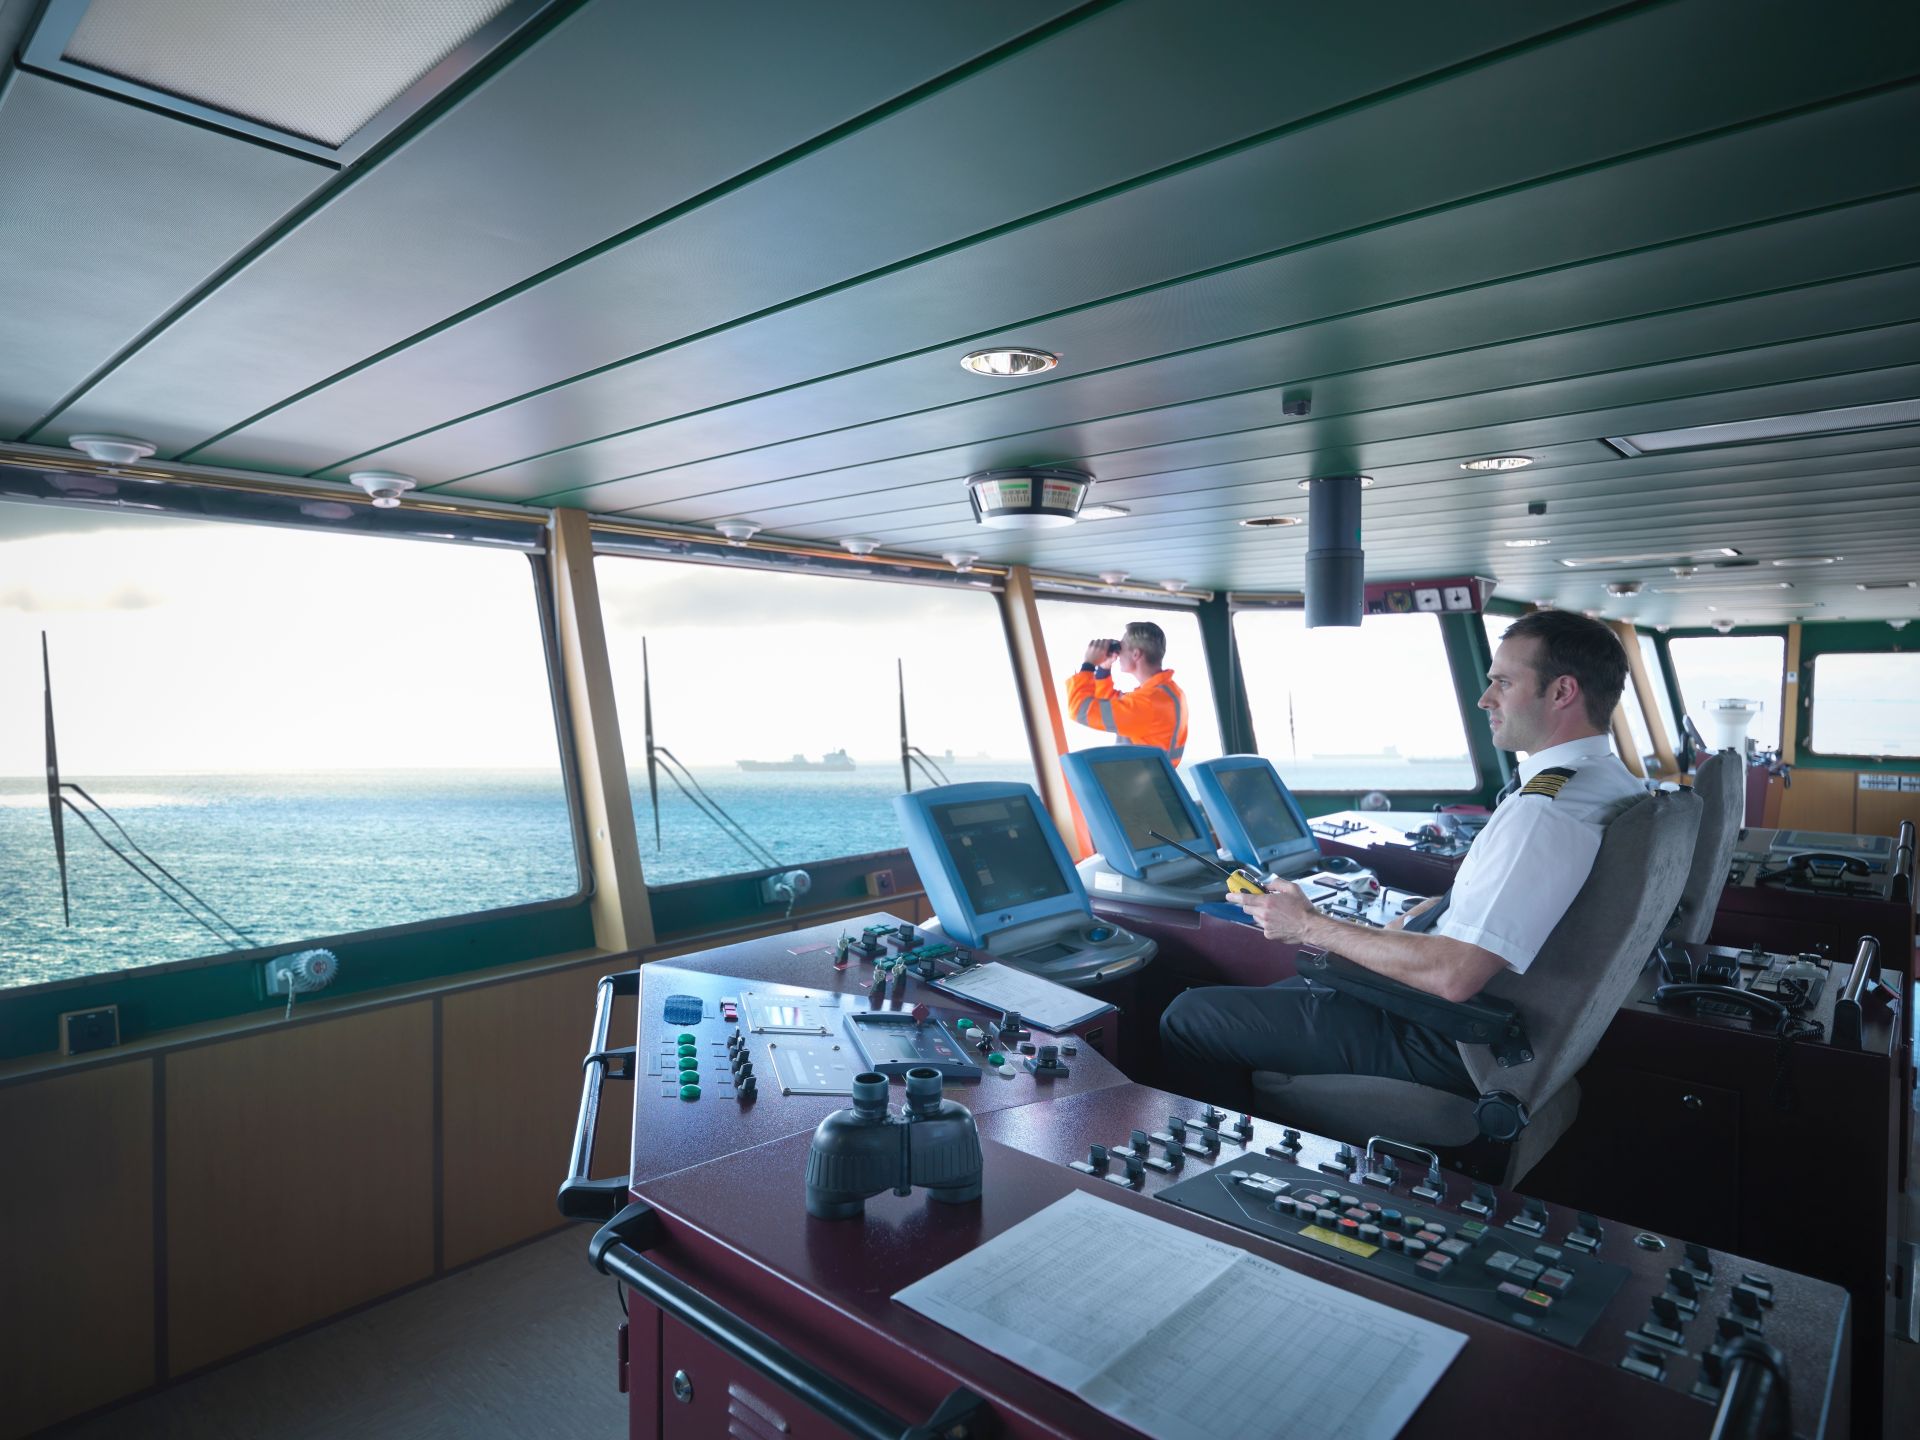 Inside the bridge of a ship with a captain operating navigational equipment while a crew member looks out to sea with binoculars, indicating active maritime navigation.